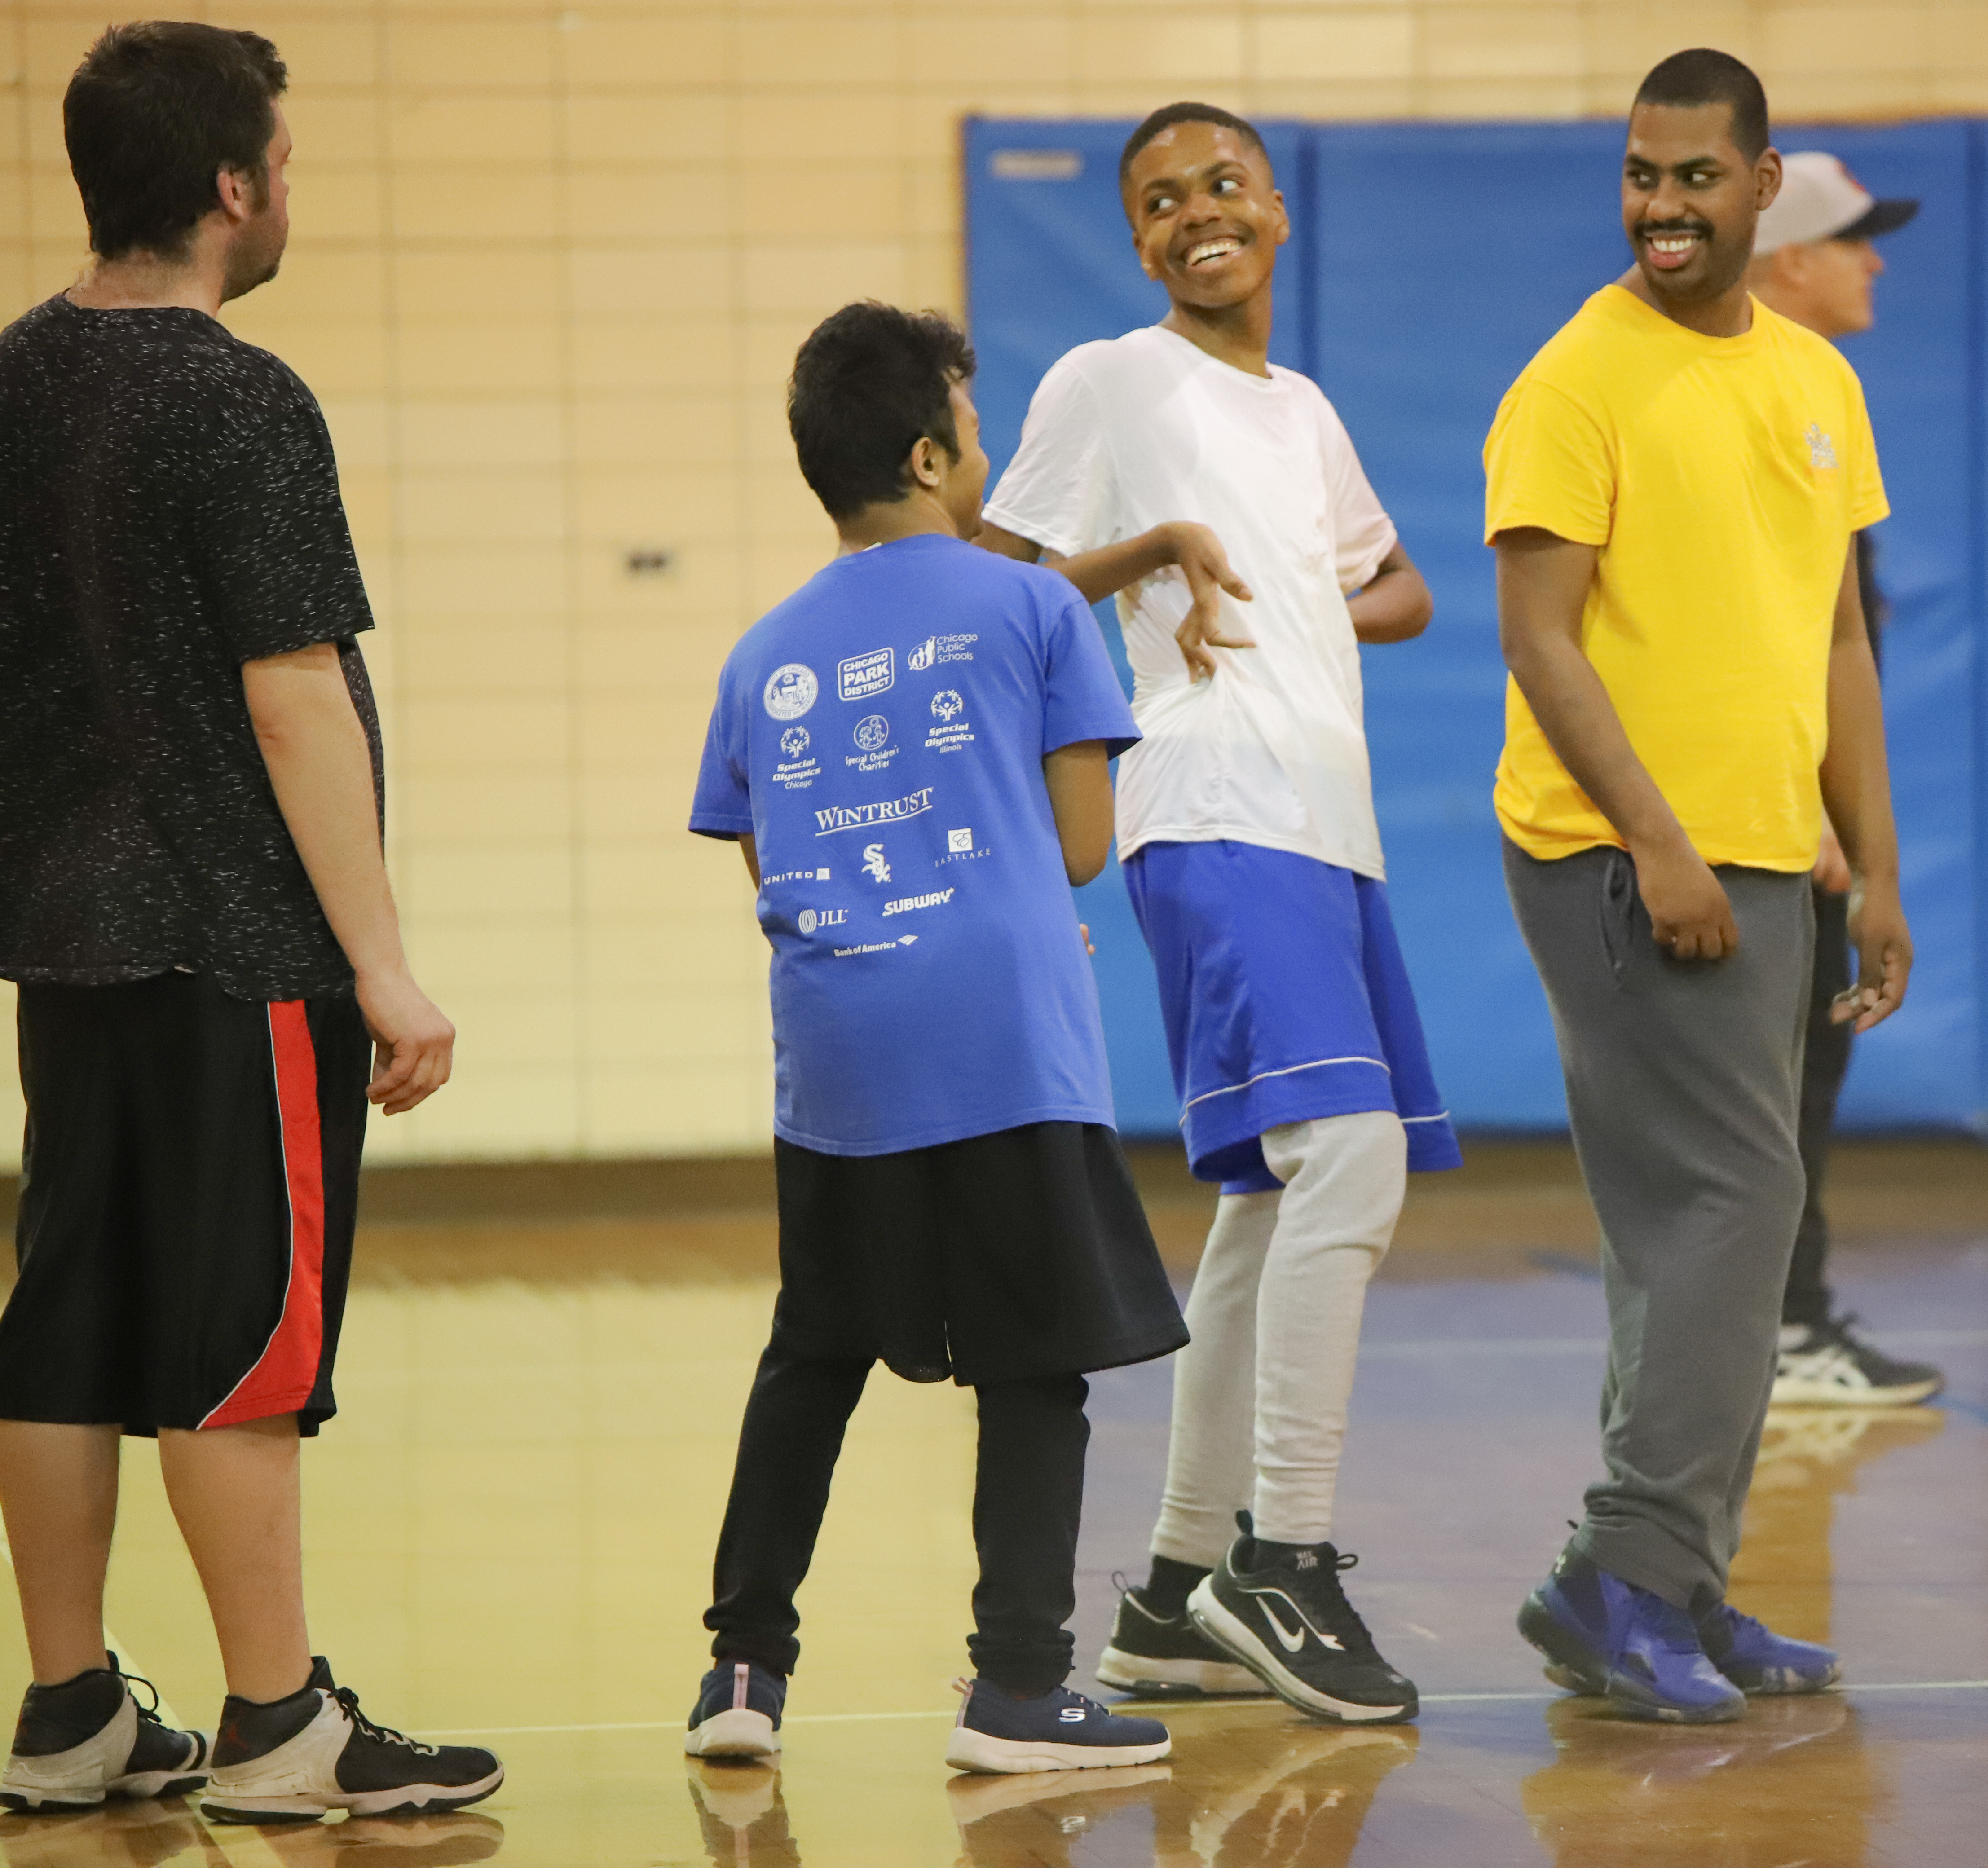 Athletes chat during basketball practice at Loyola Park in Chicago on March 1. (Photo by Samantha Davis)